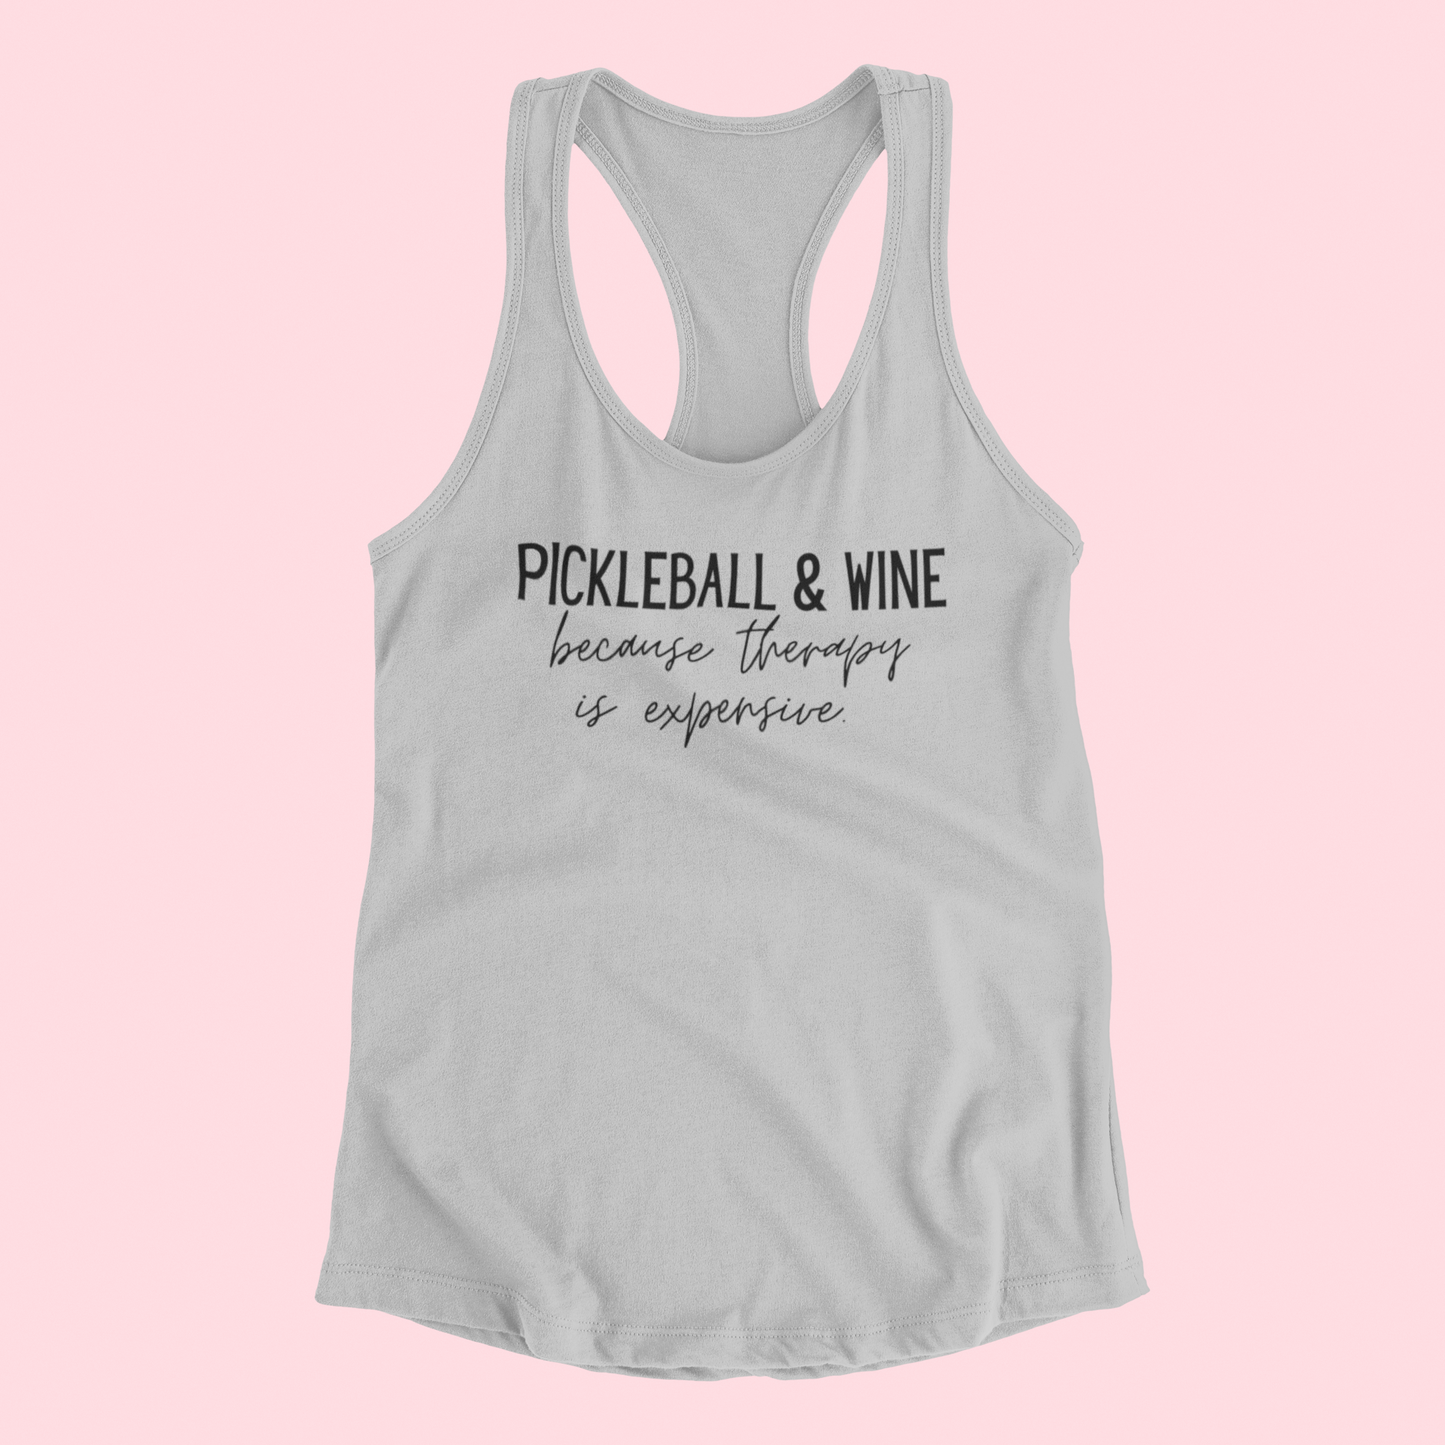 Pickleball & Wine...because therapy is expensive